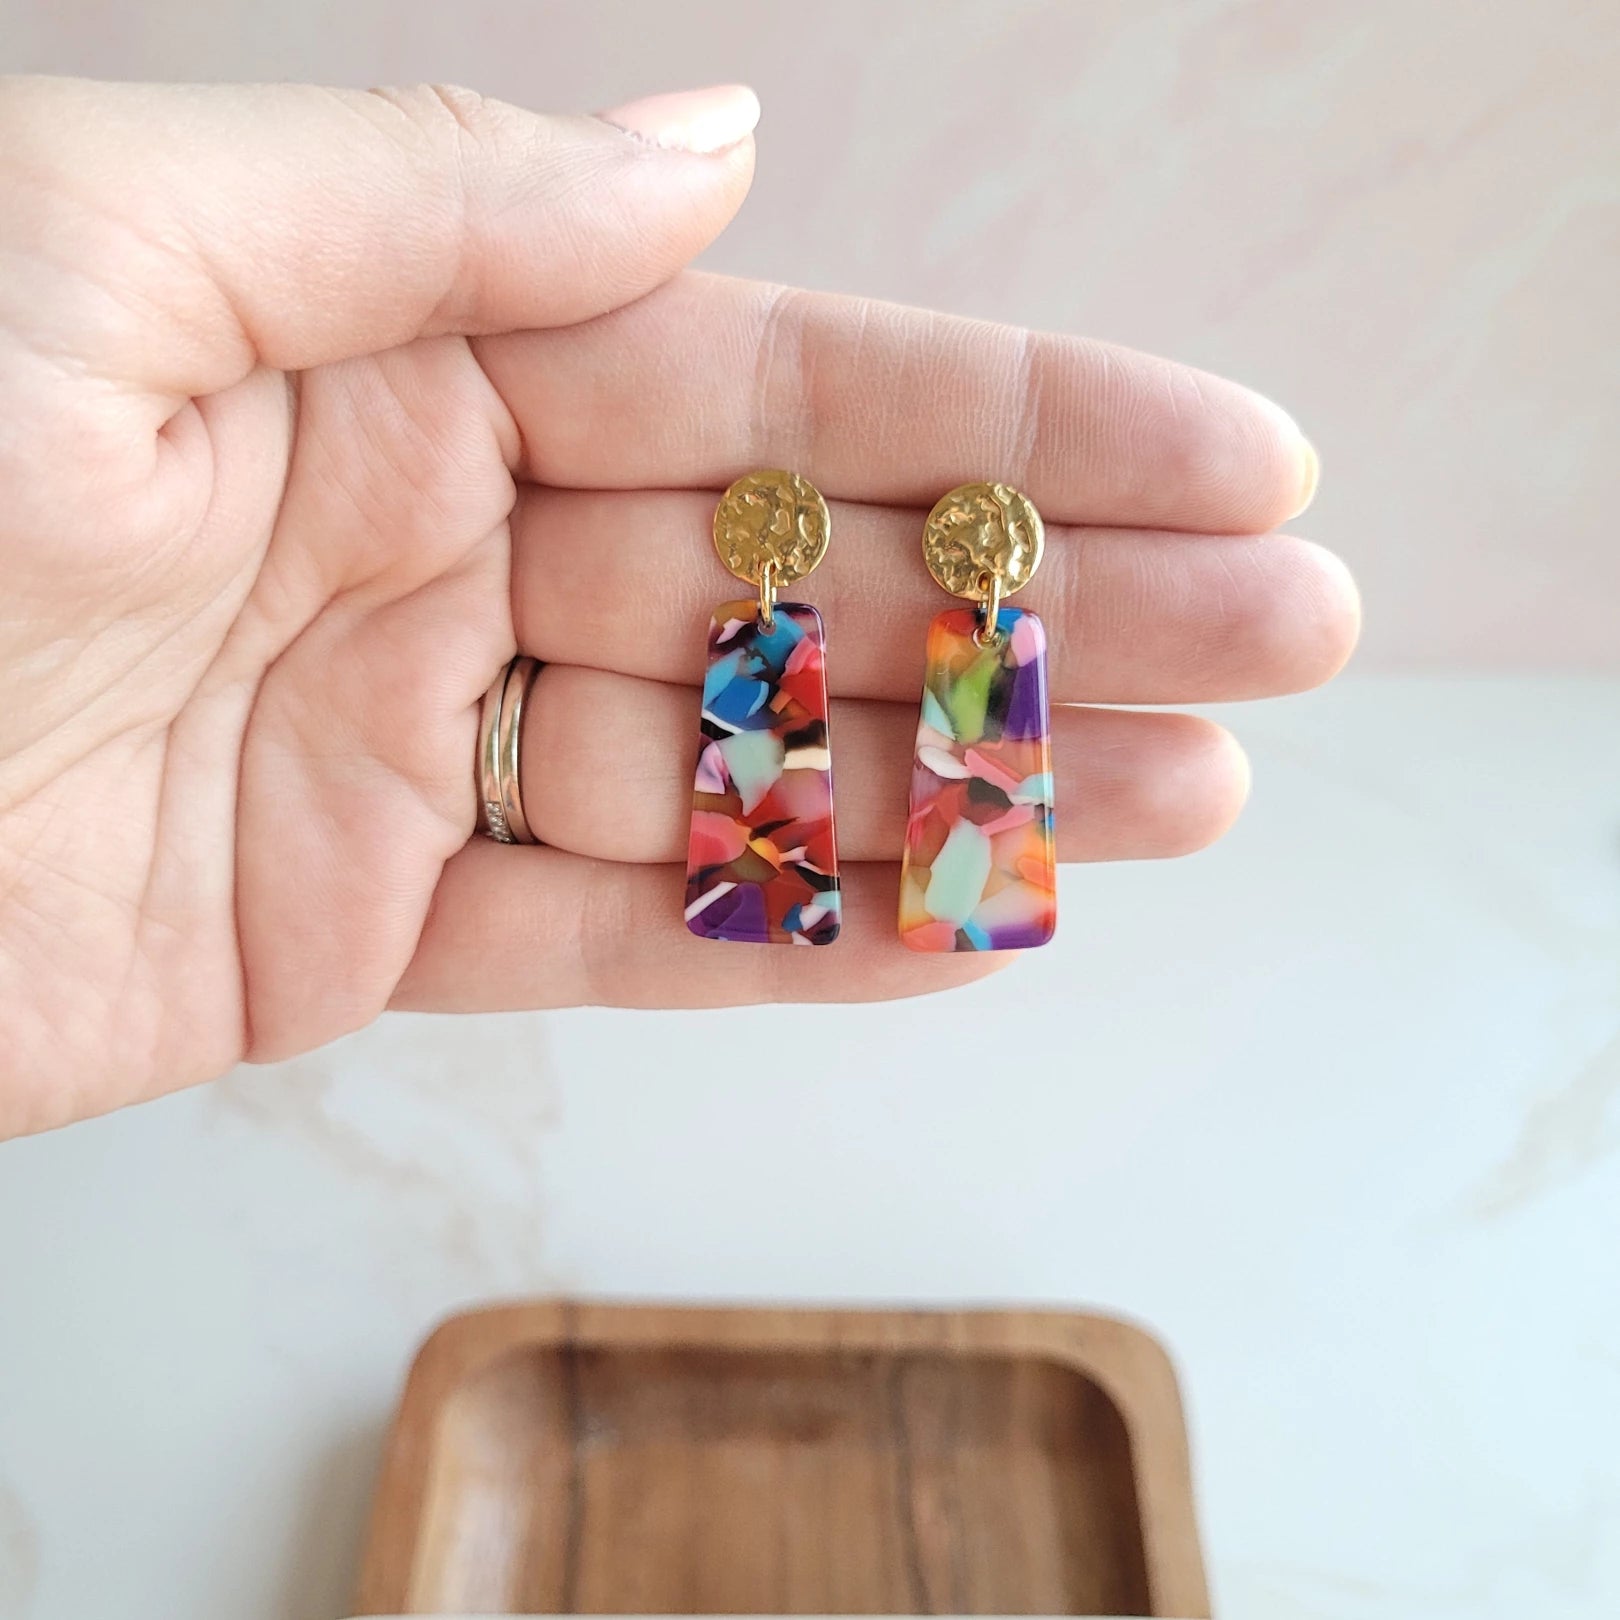 Our Mia Mini Earrings feature a fun pop of color with gold stud accents. These dainty earrings make the perfect finishing touch to any outfit, while still being small and delicate enough to wear every day.